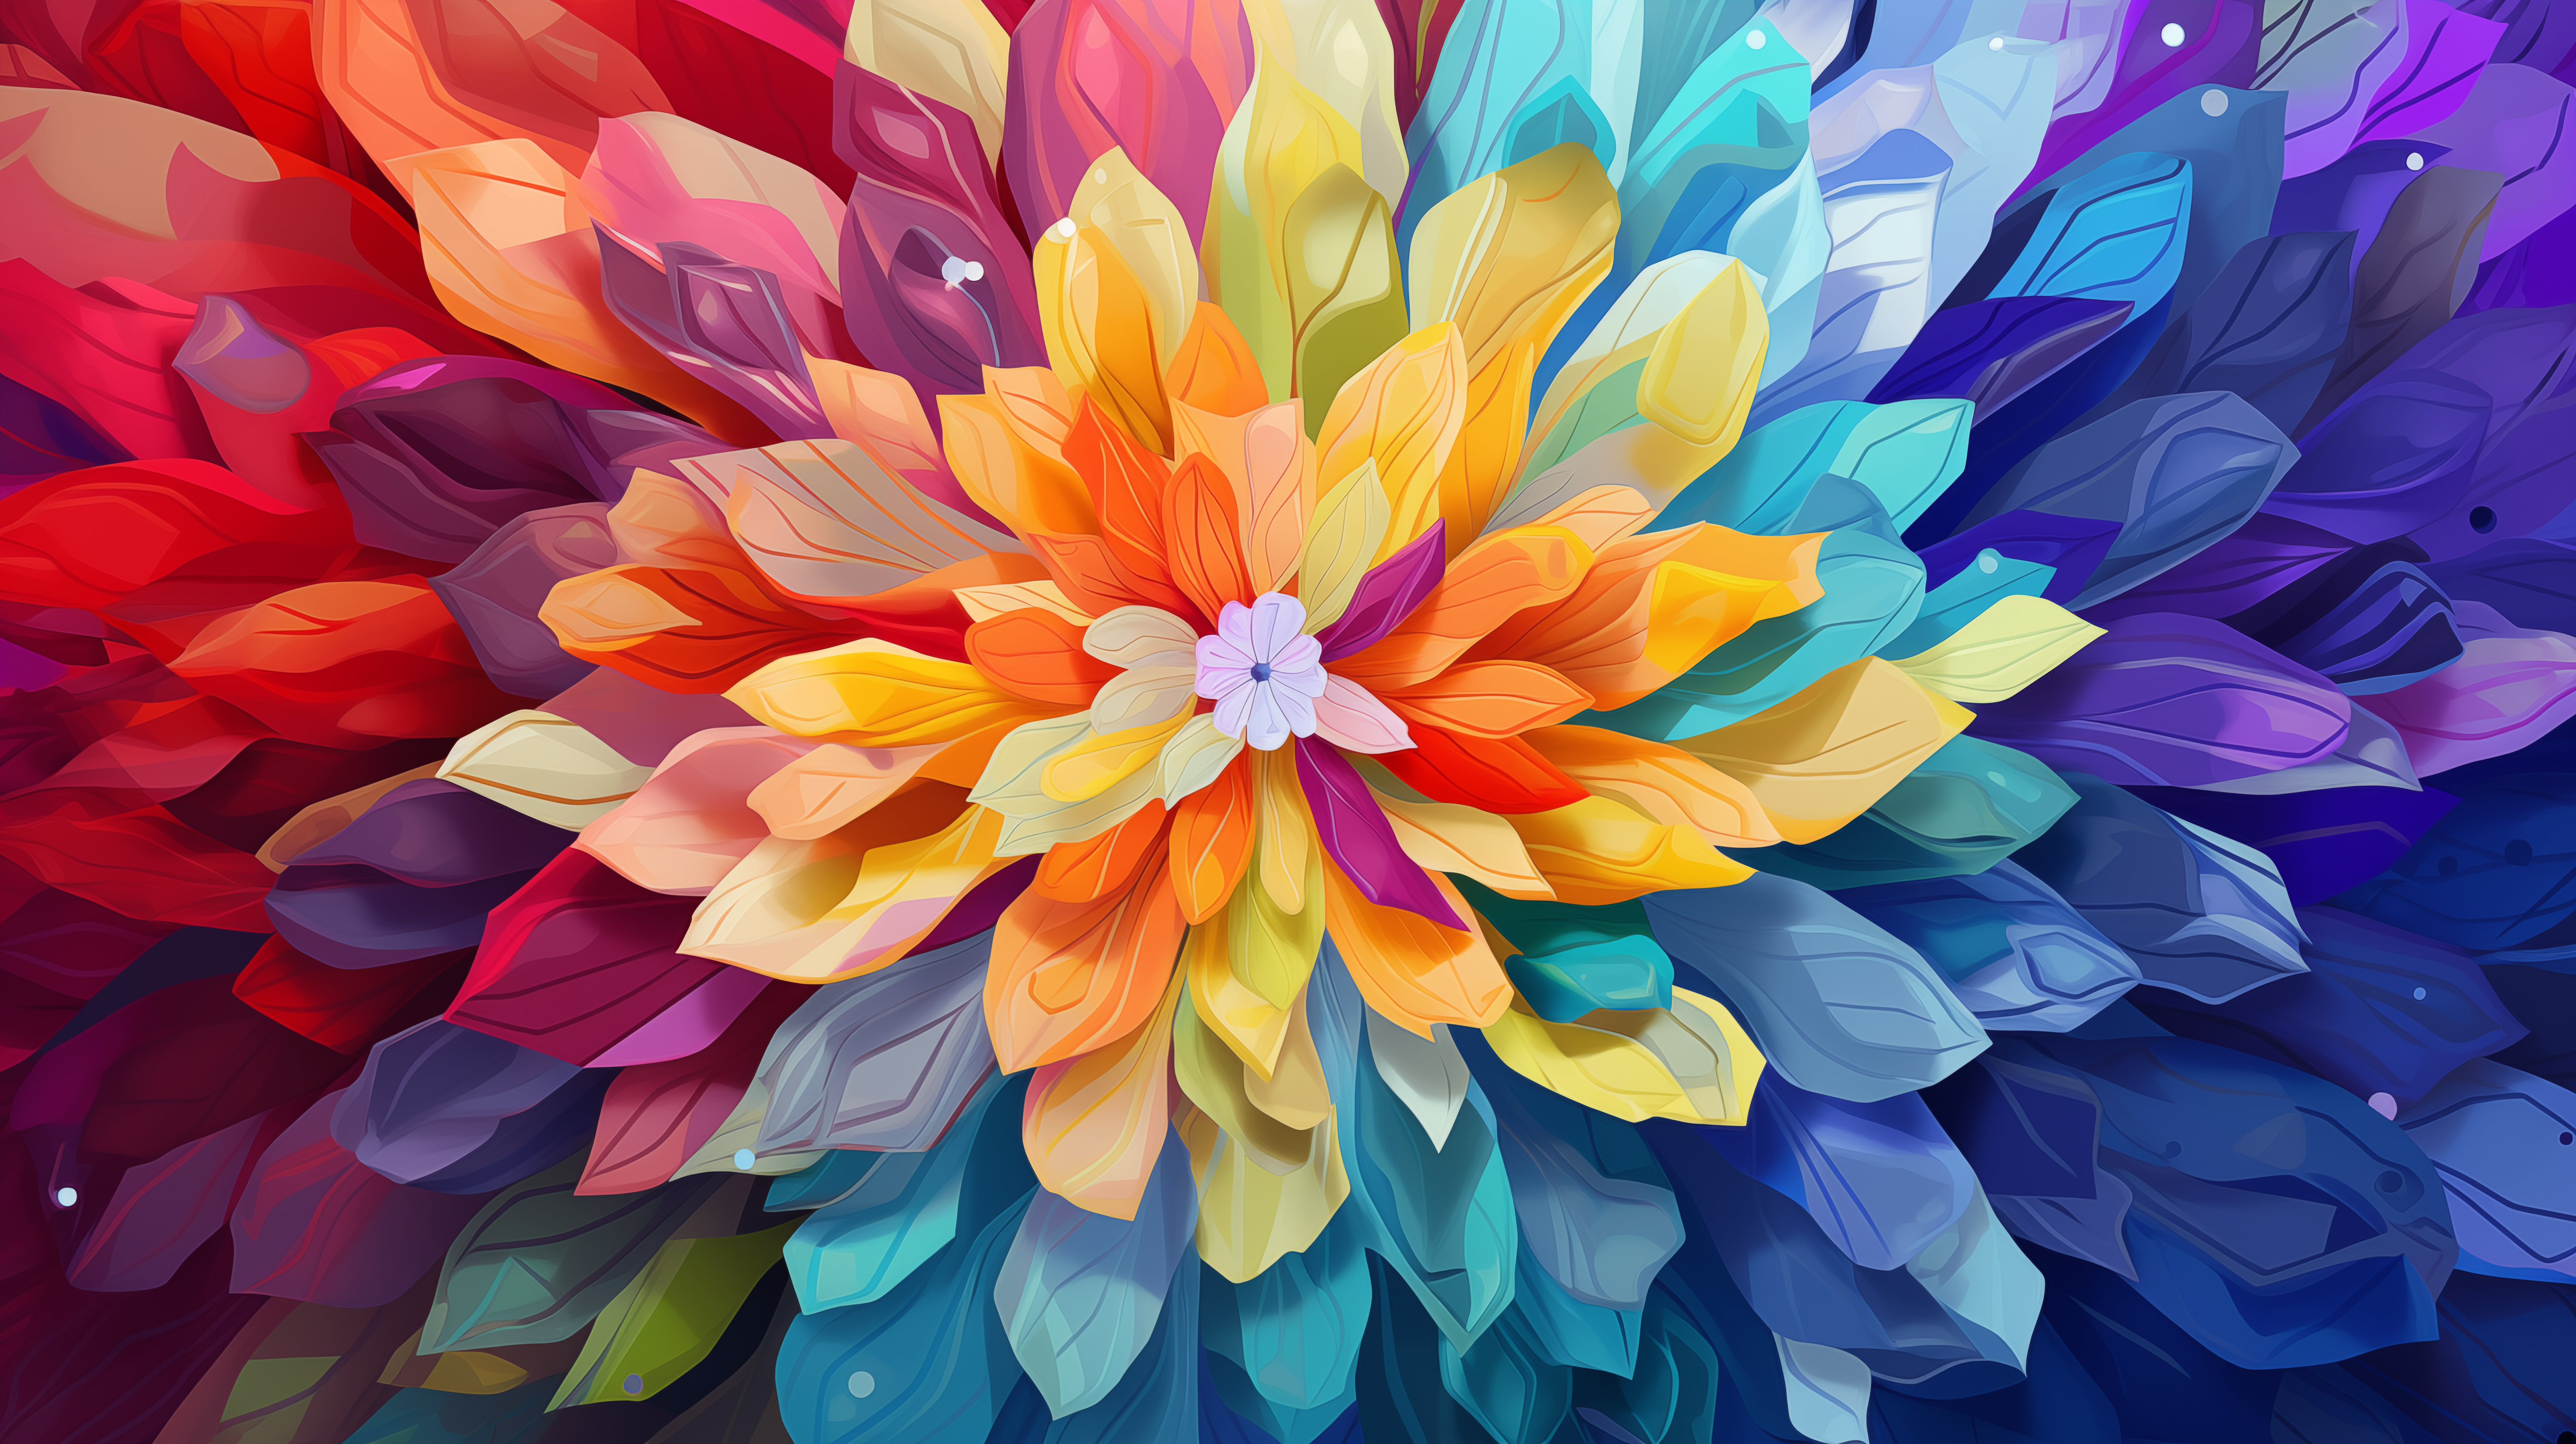 Colorful abstract flower with vibrant petals in HD desktop wallpaper background.